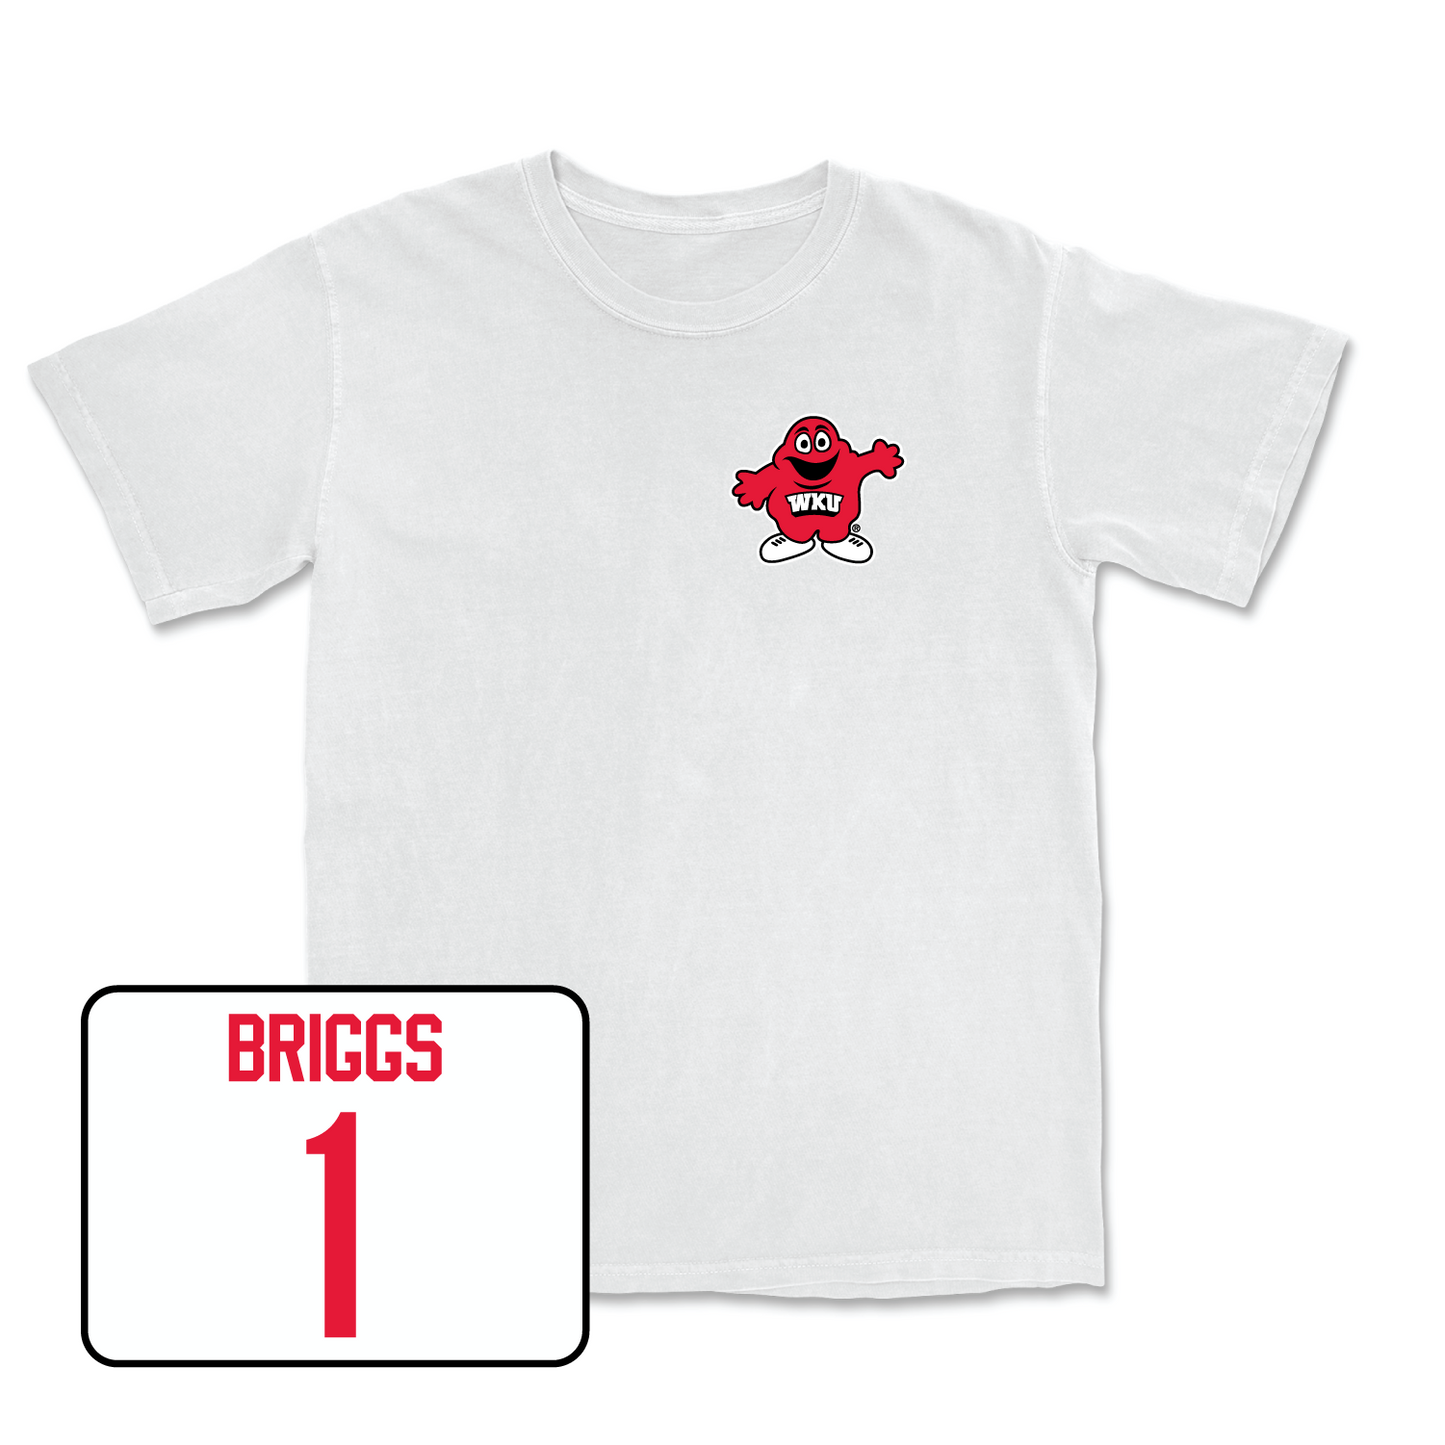 White Women's Volleyball Big Red Comfort Colors Tee 2X-Large / Paige Briggs | #1